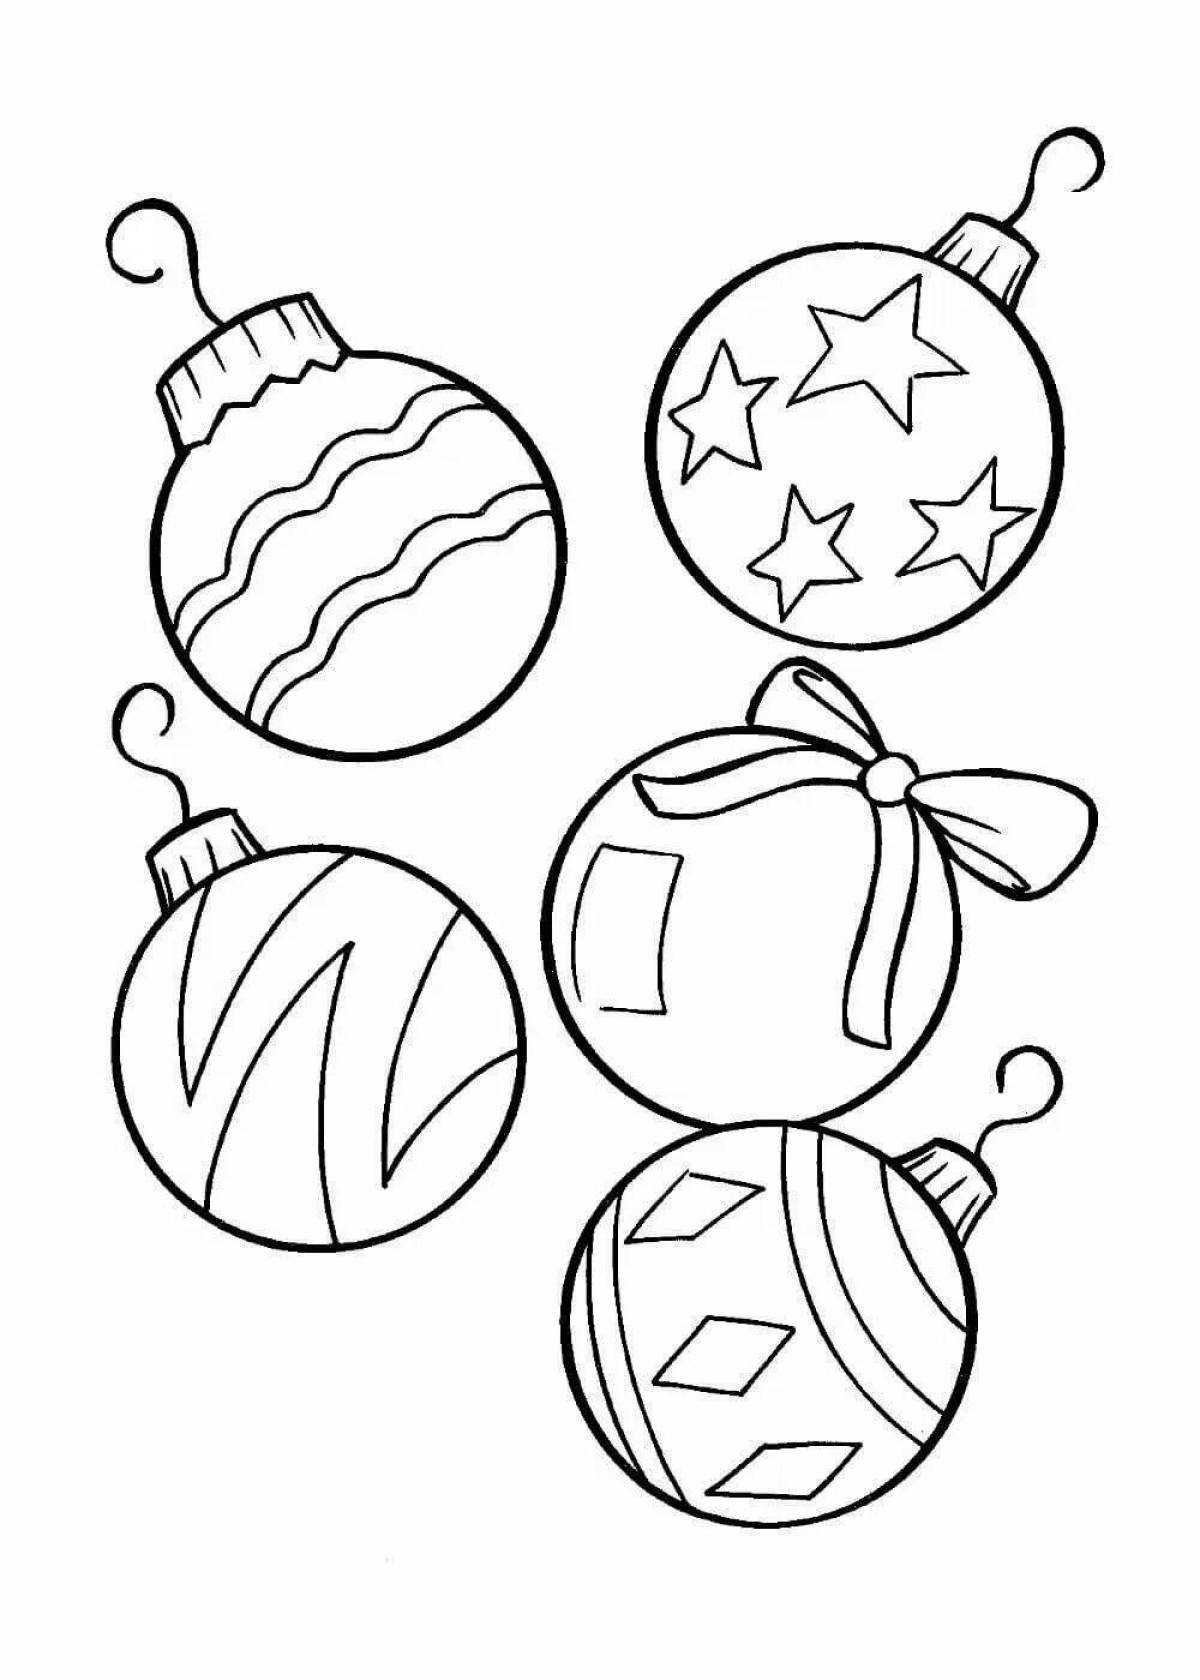 Glitter Christmas toy ball coloring page